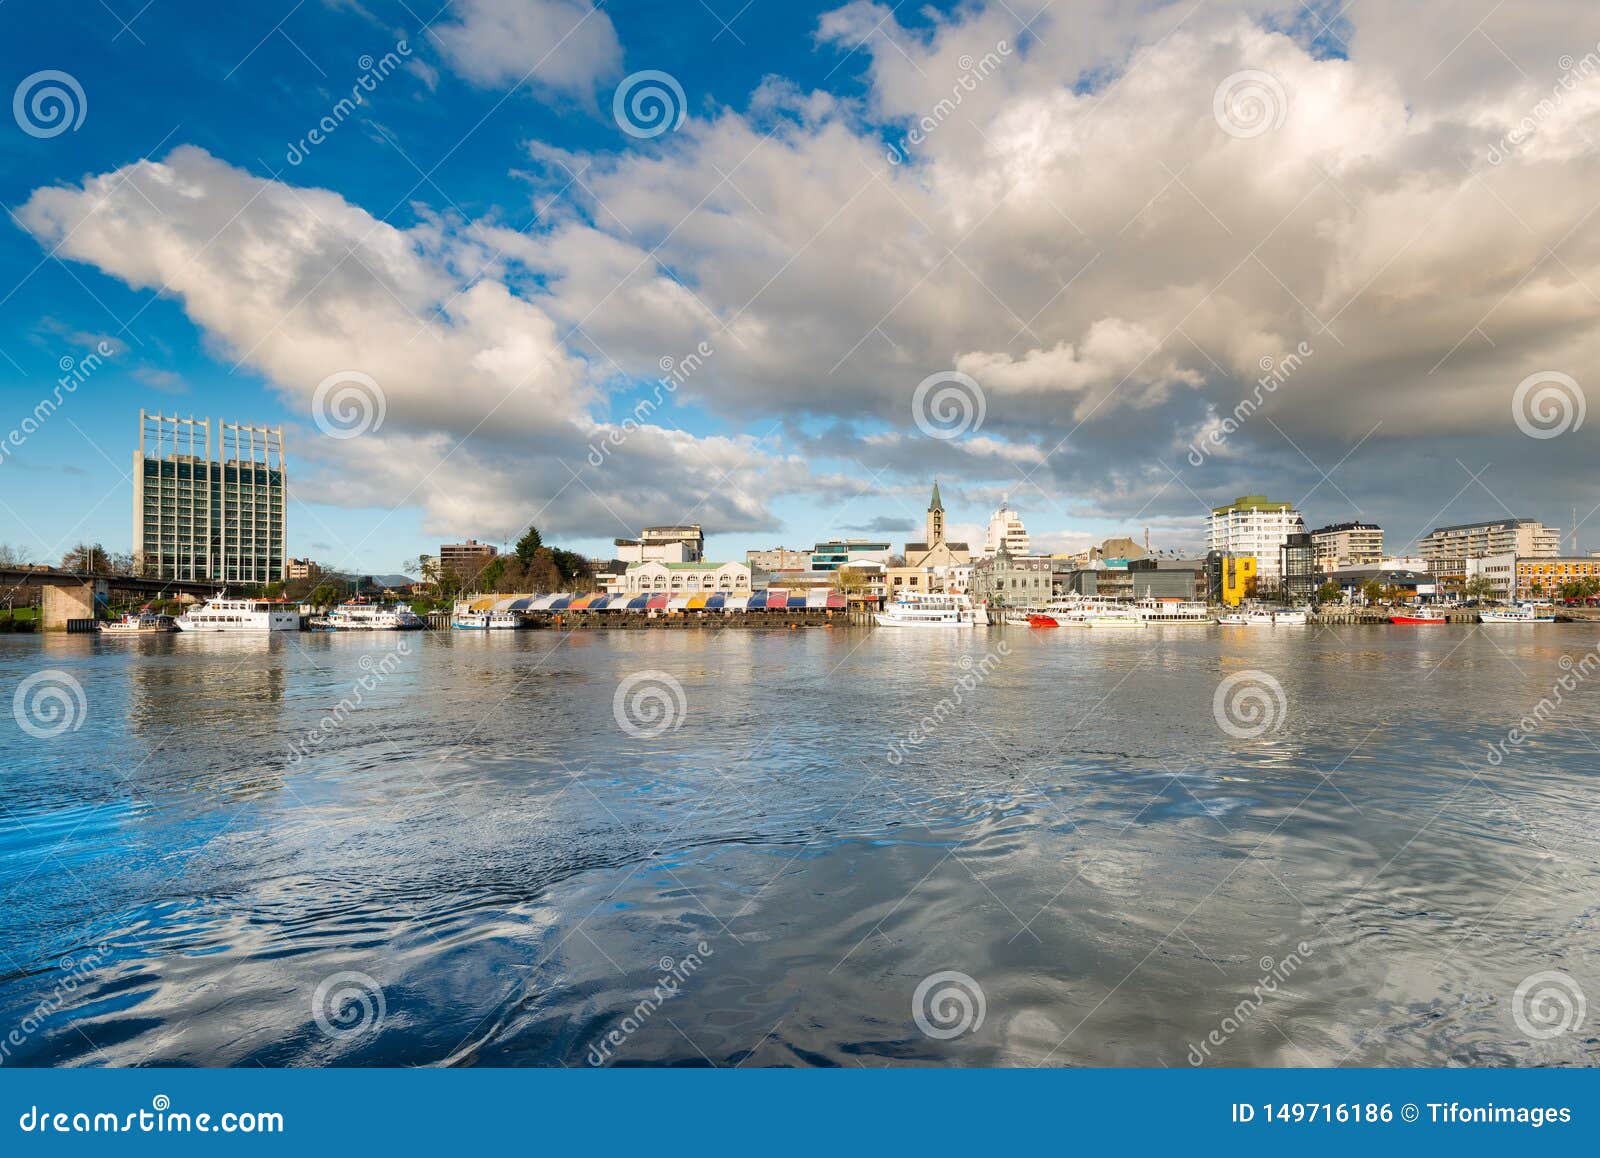 the city of valdivia at the shore of calle-calle river, chile